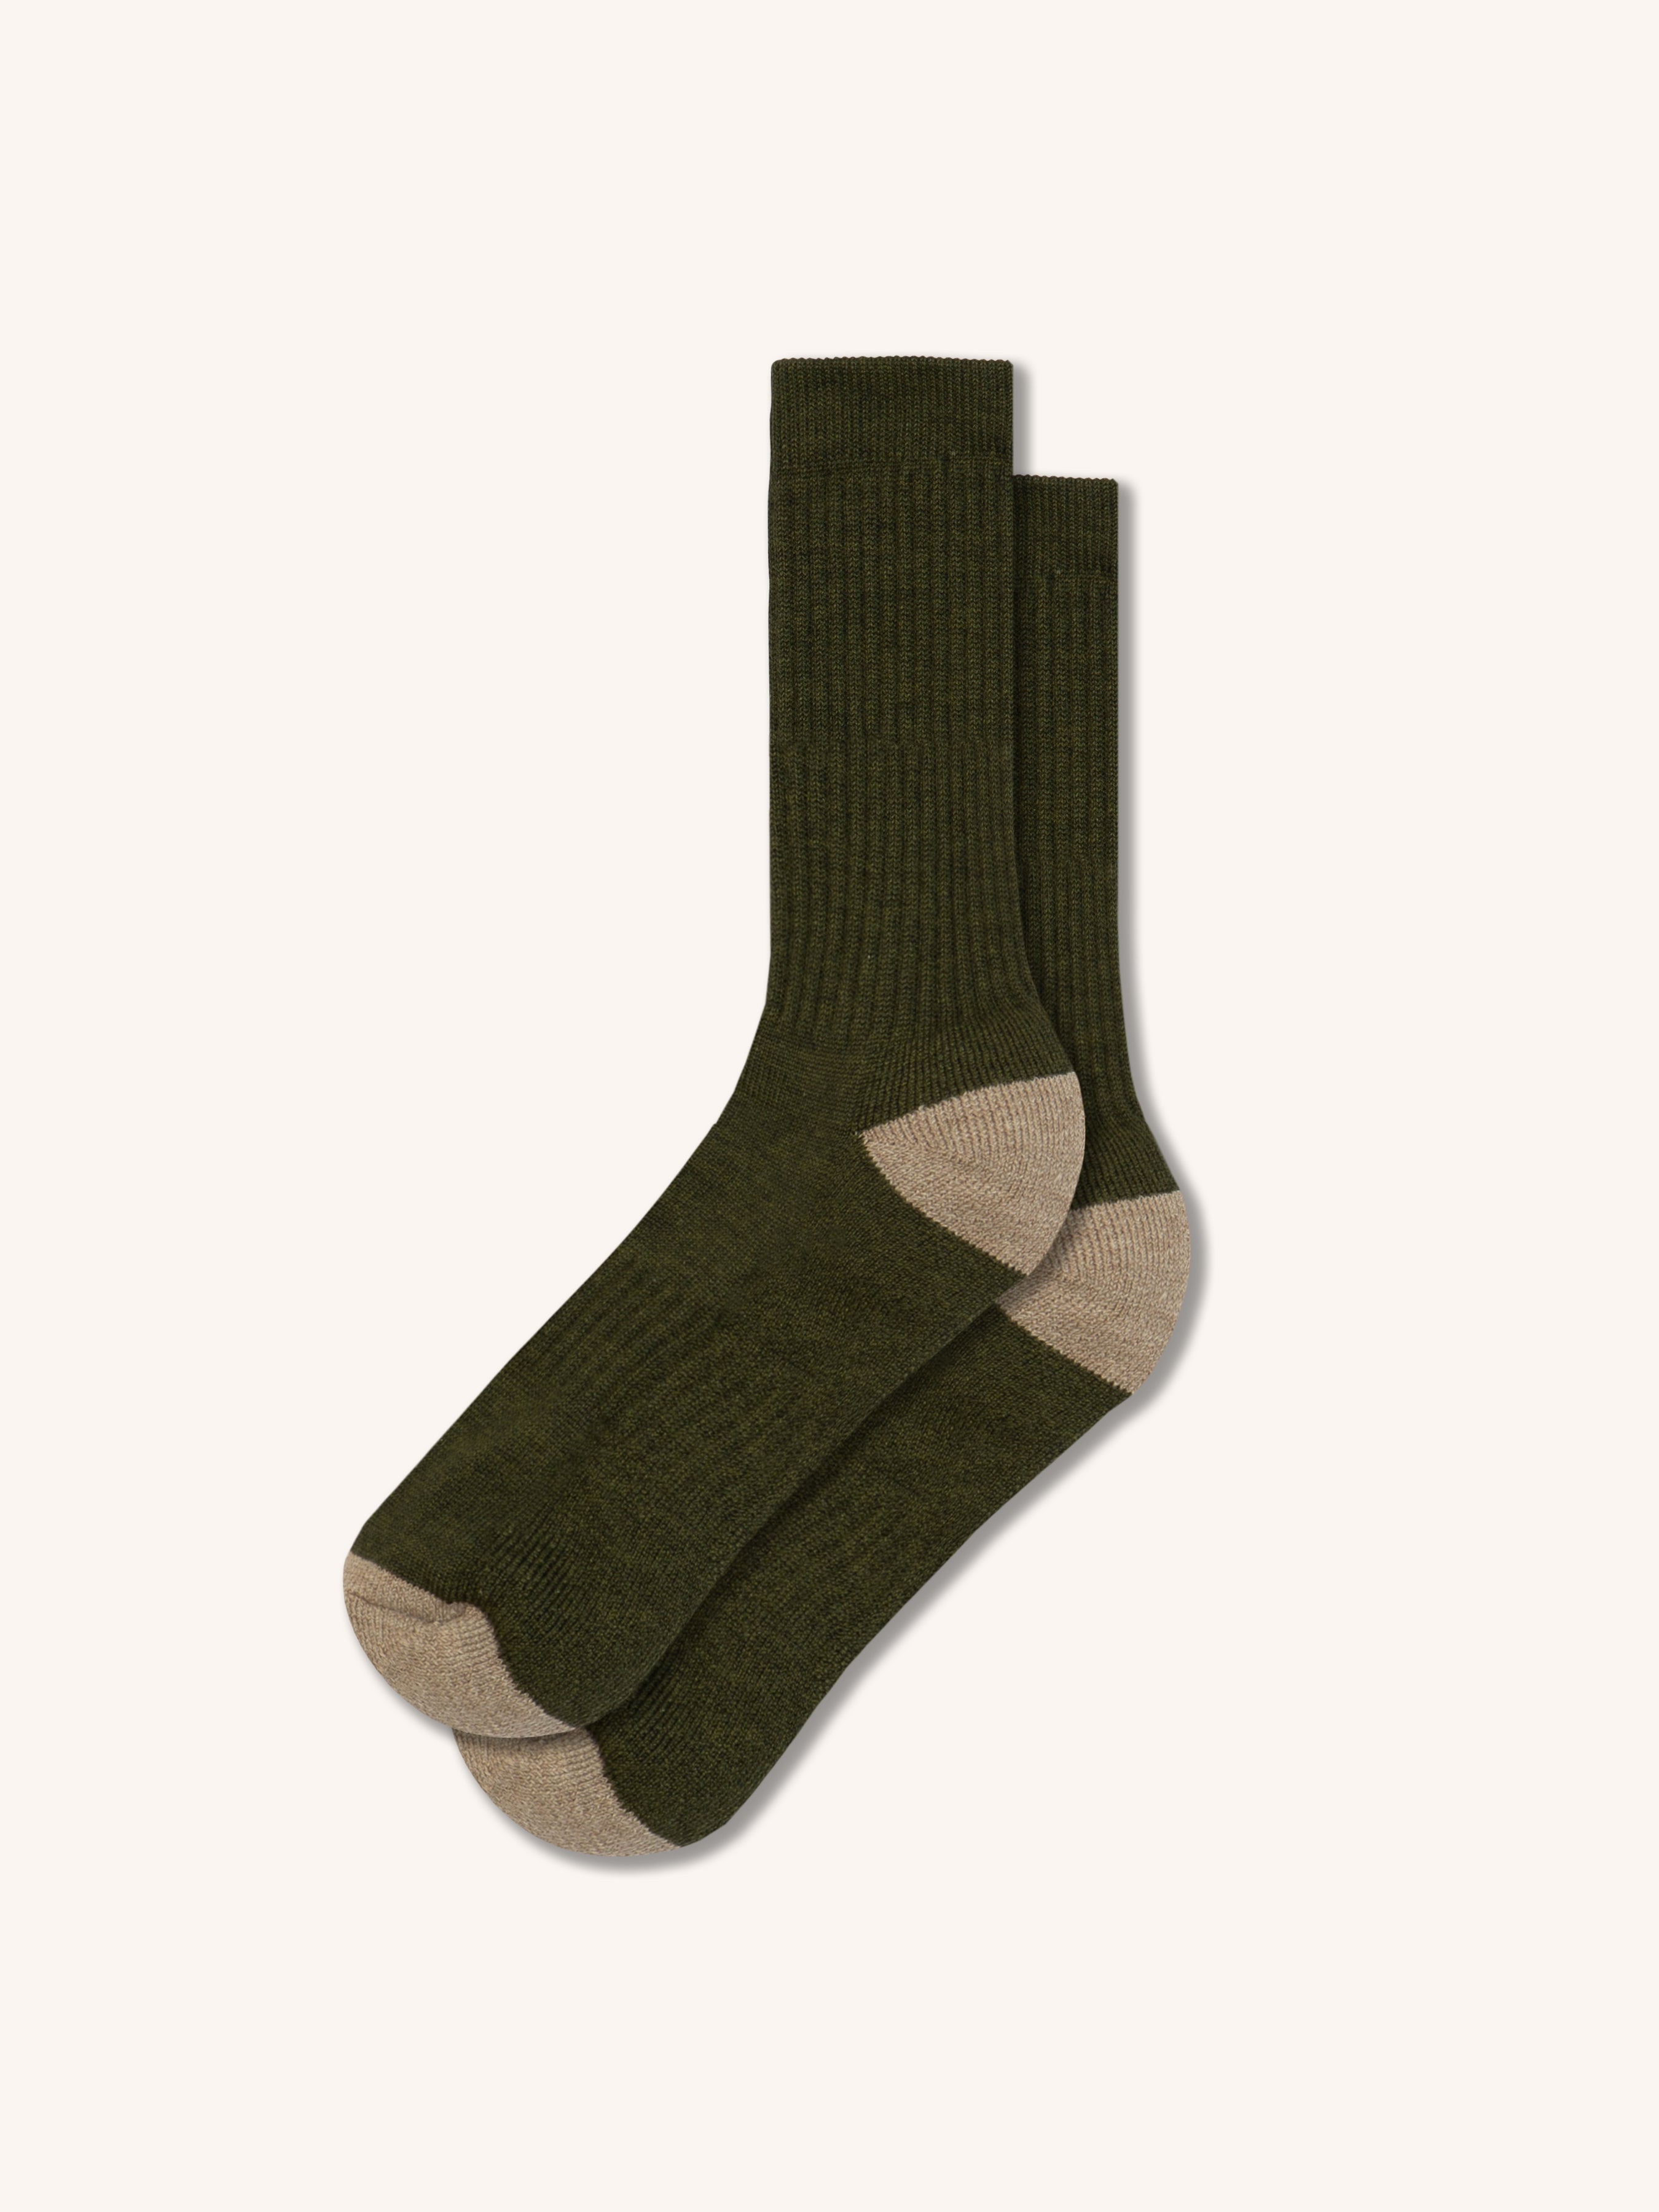 A pair of knitted wool socks by KESTIN.